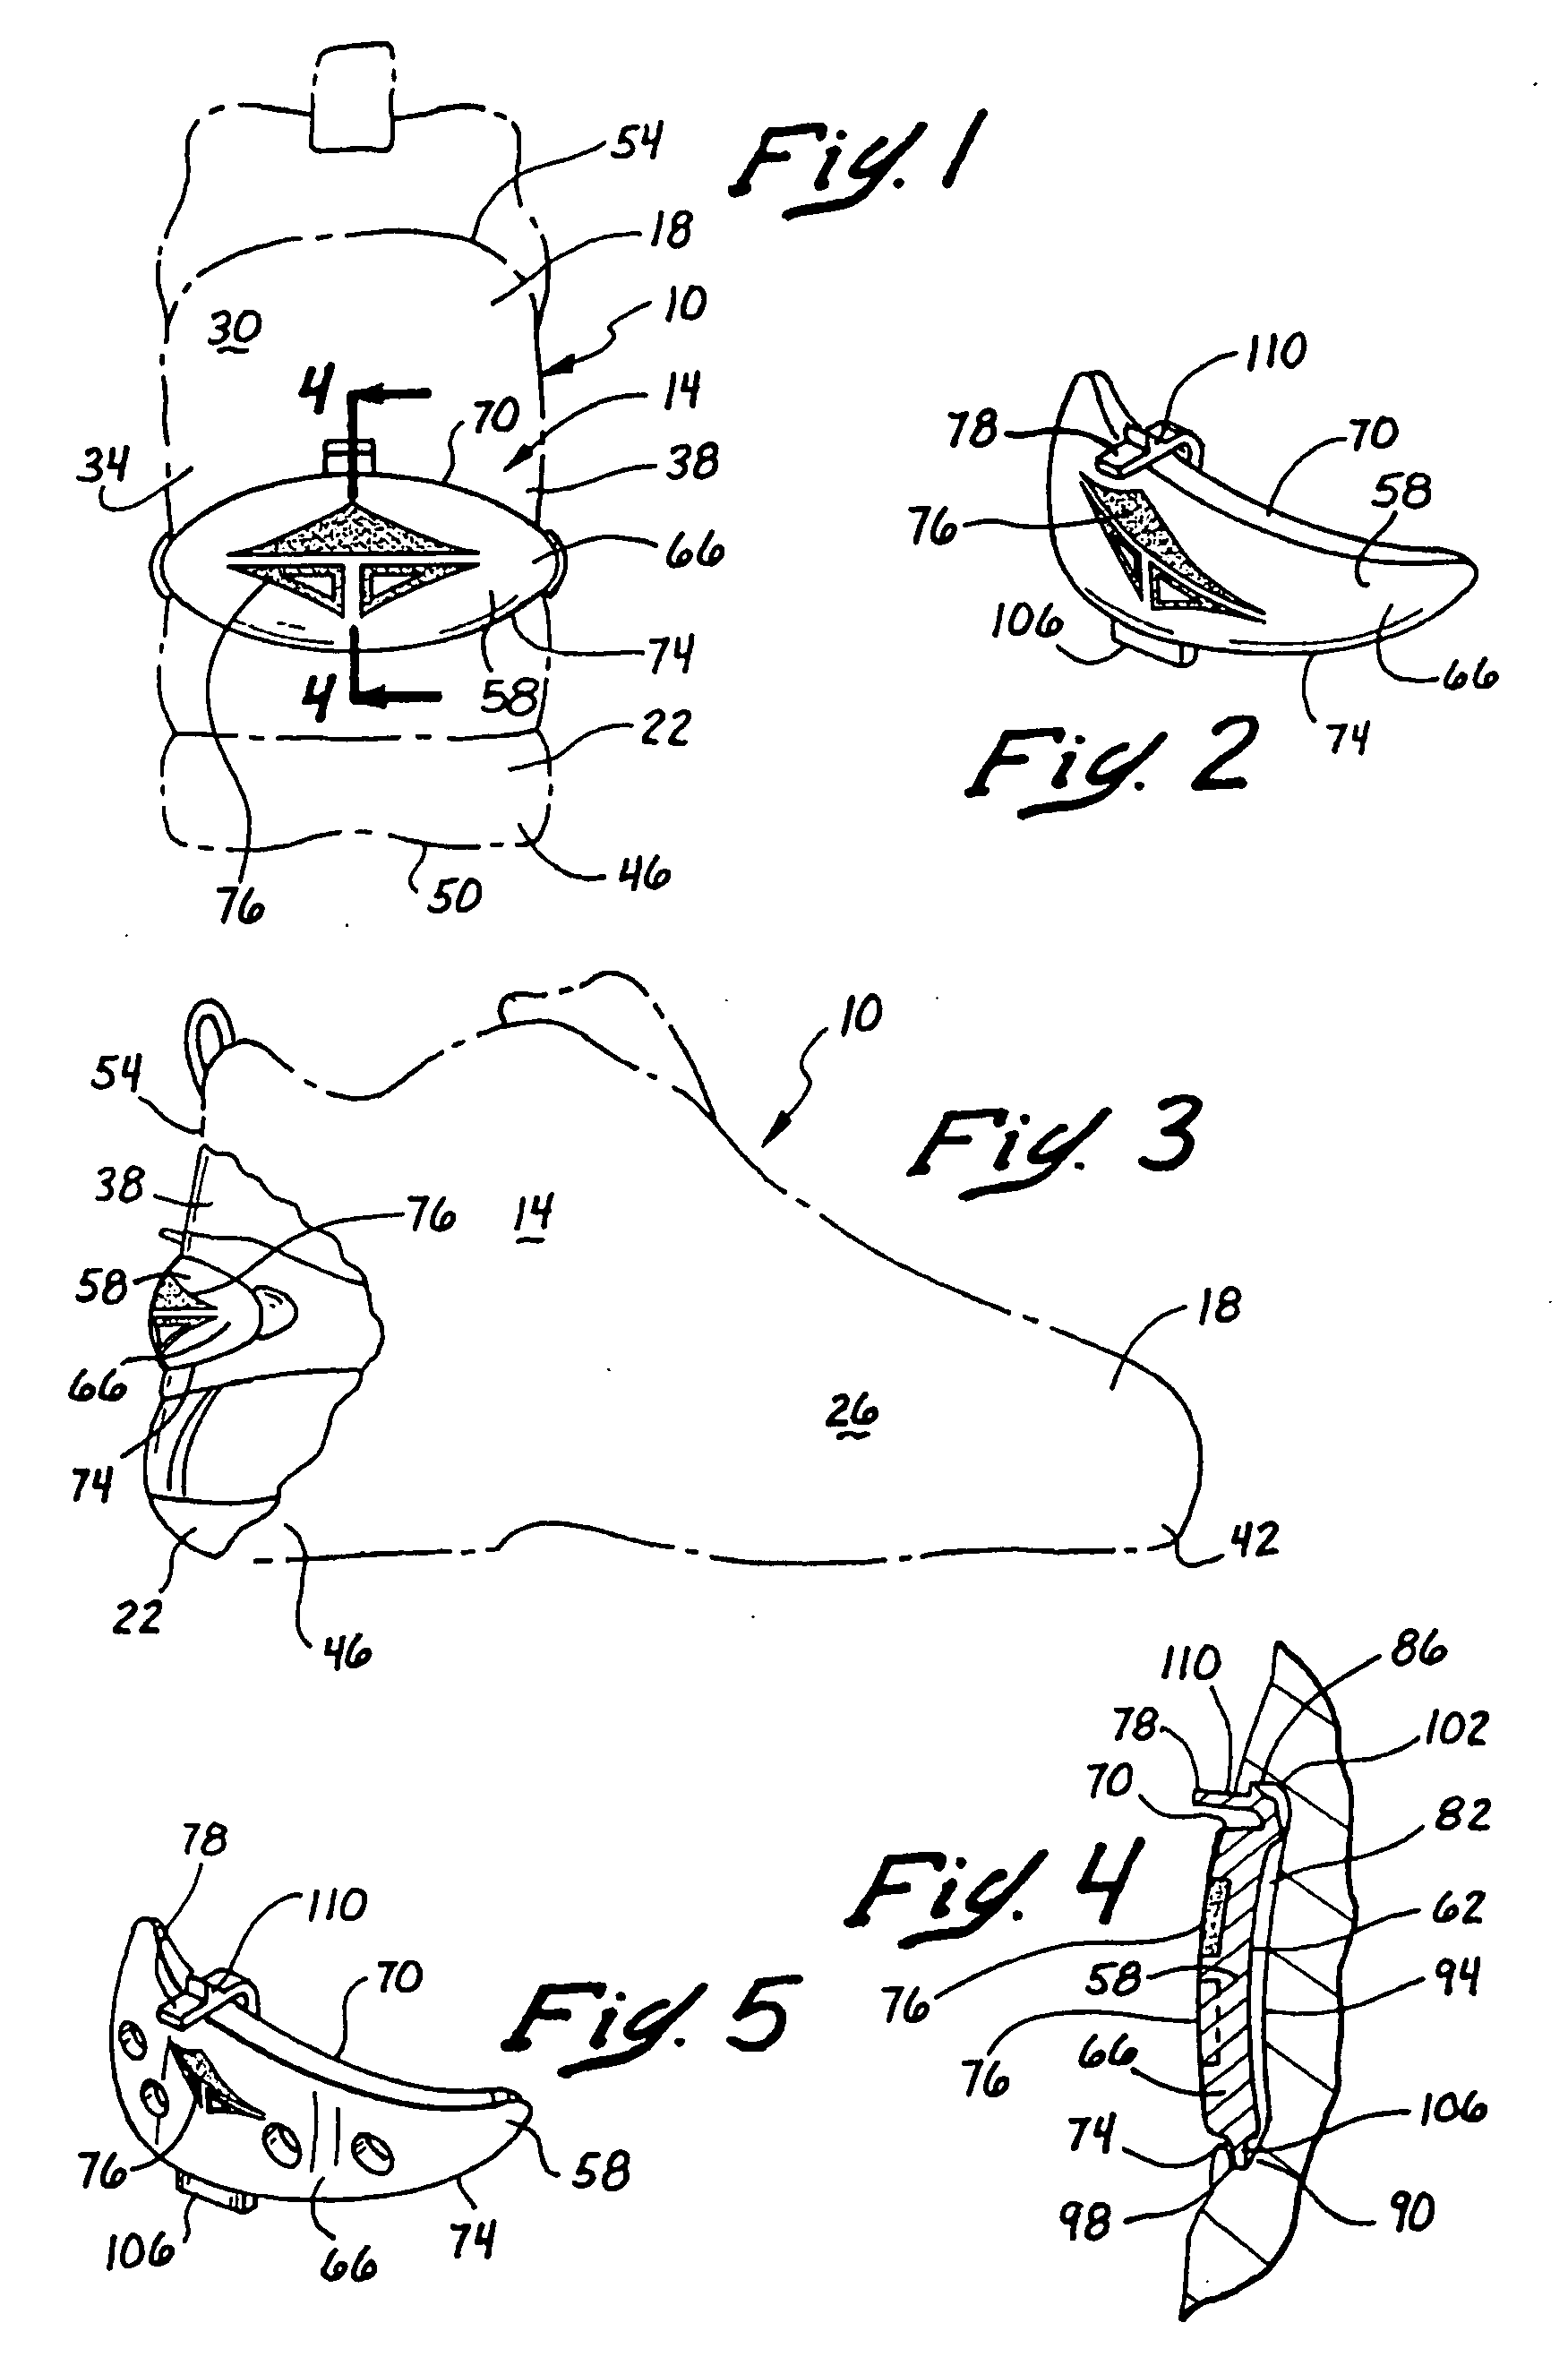 Variable weight athletic shoe with magnetic inserts